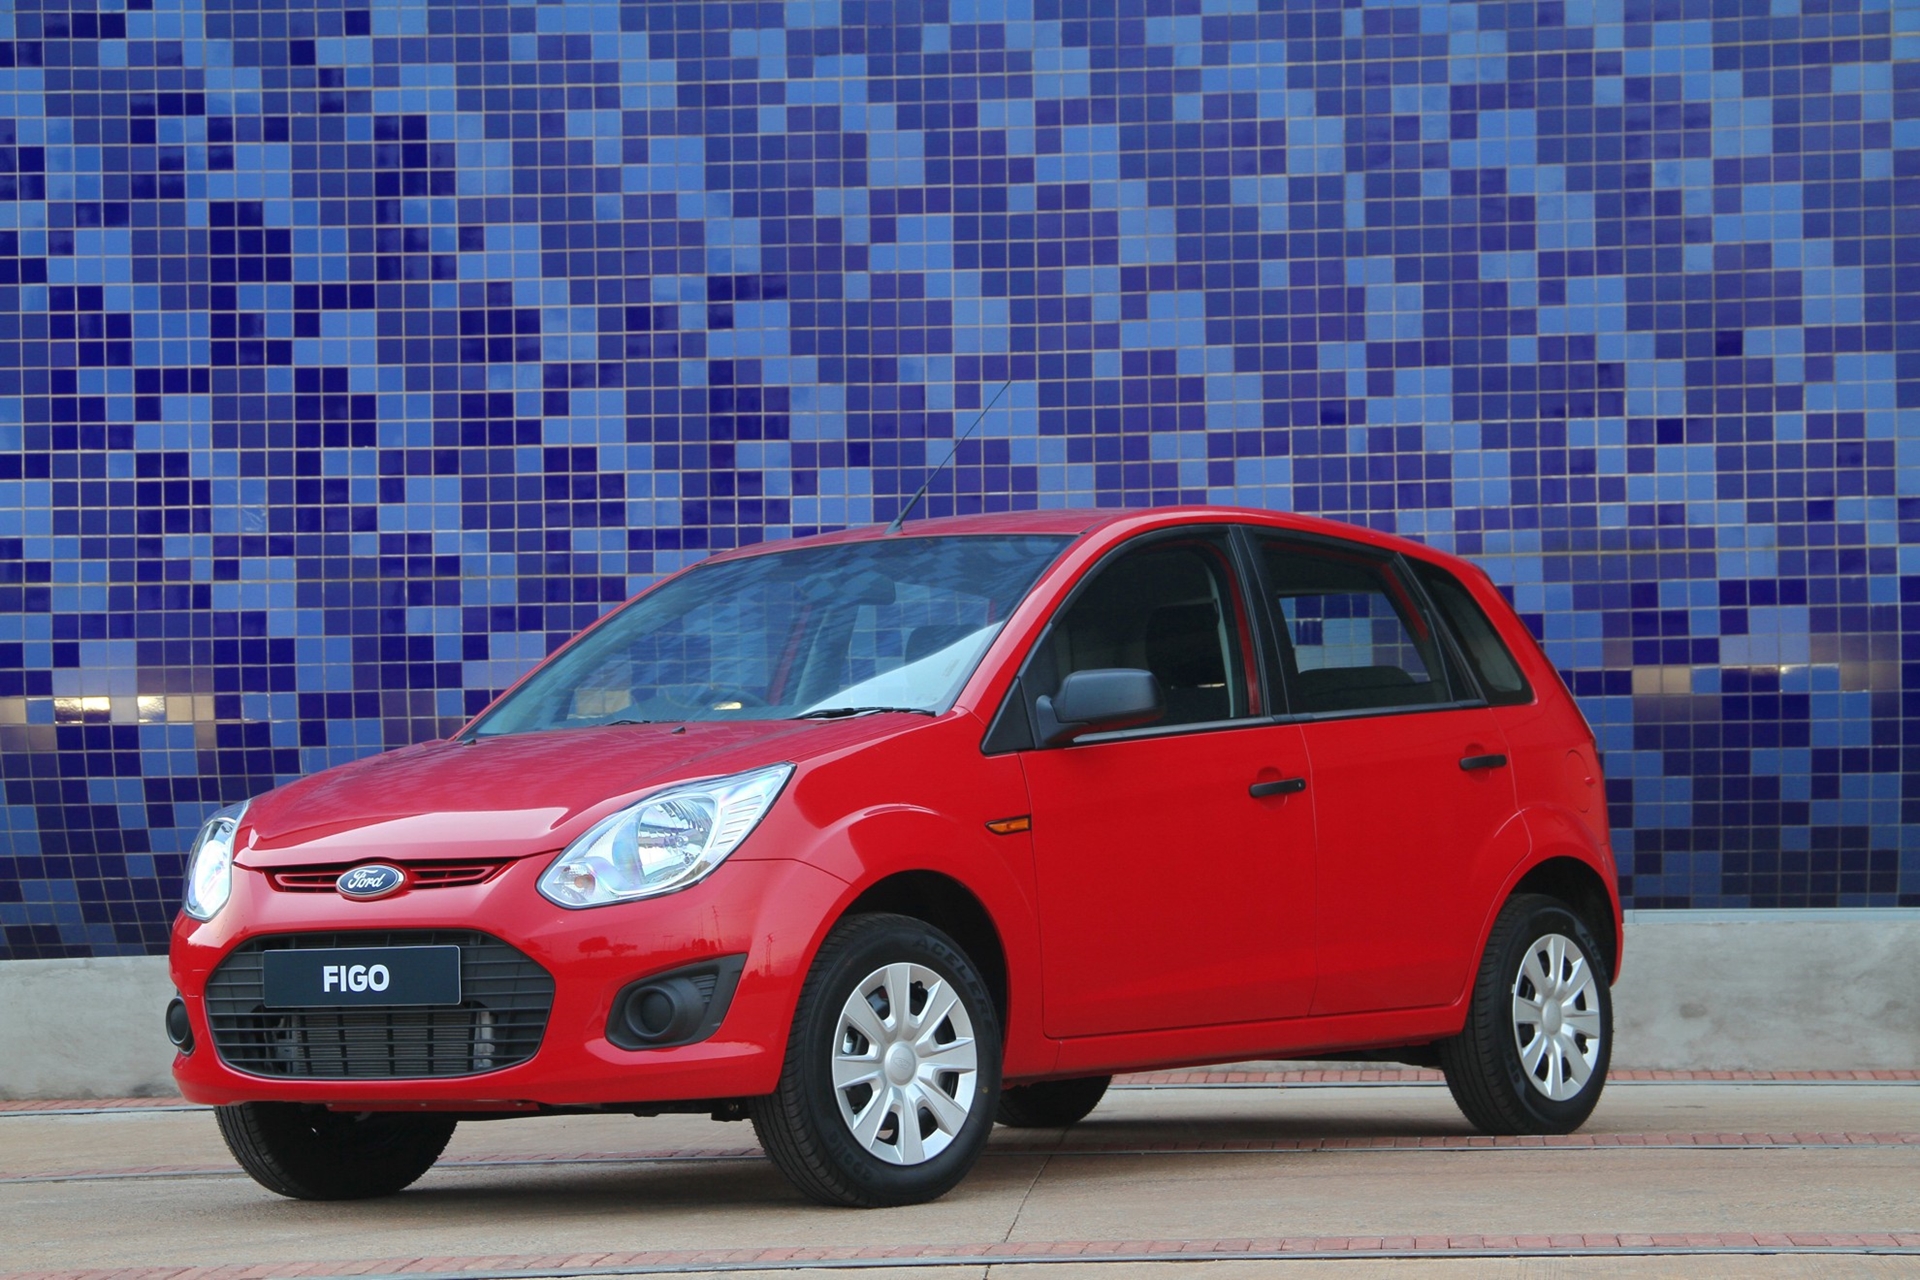 Ford Figo in South Africa get’s Fashionable Update